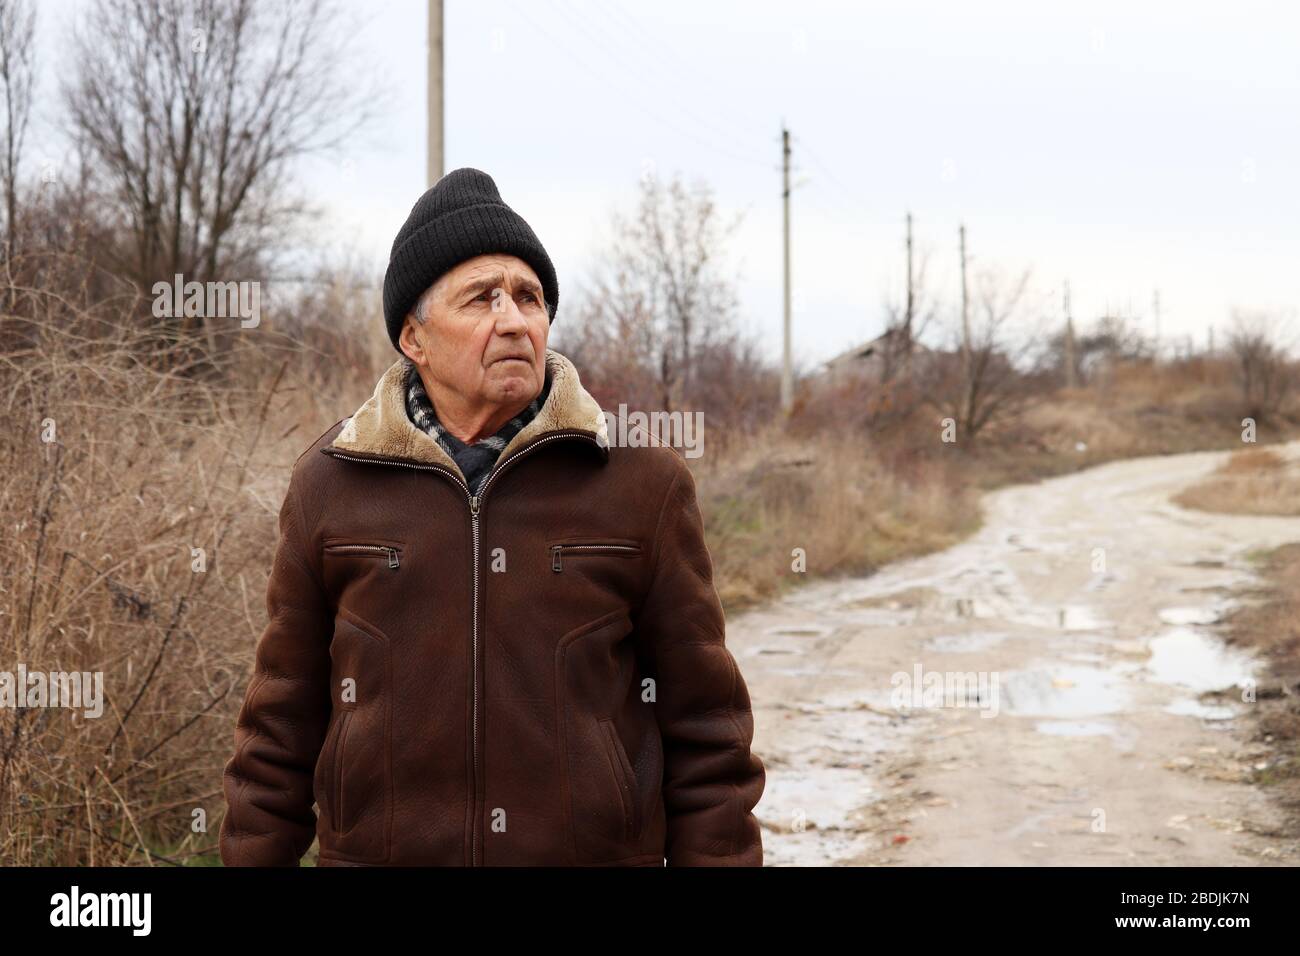 Elderly man standing on rural street in cloudy spring day. Worried face expression, concept of walking during coronavirus quarantine, life in village Stock Photo